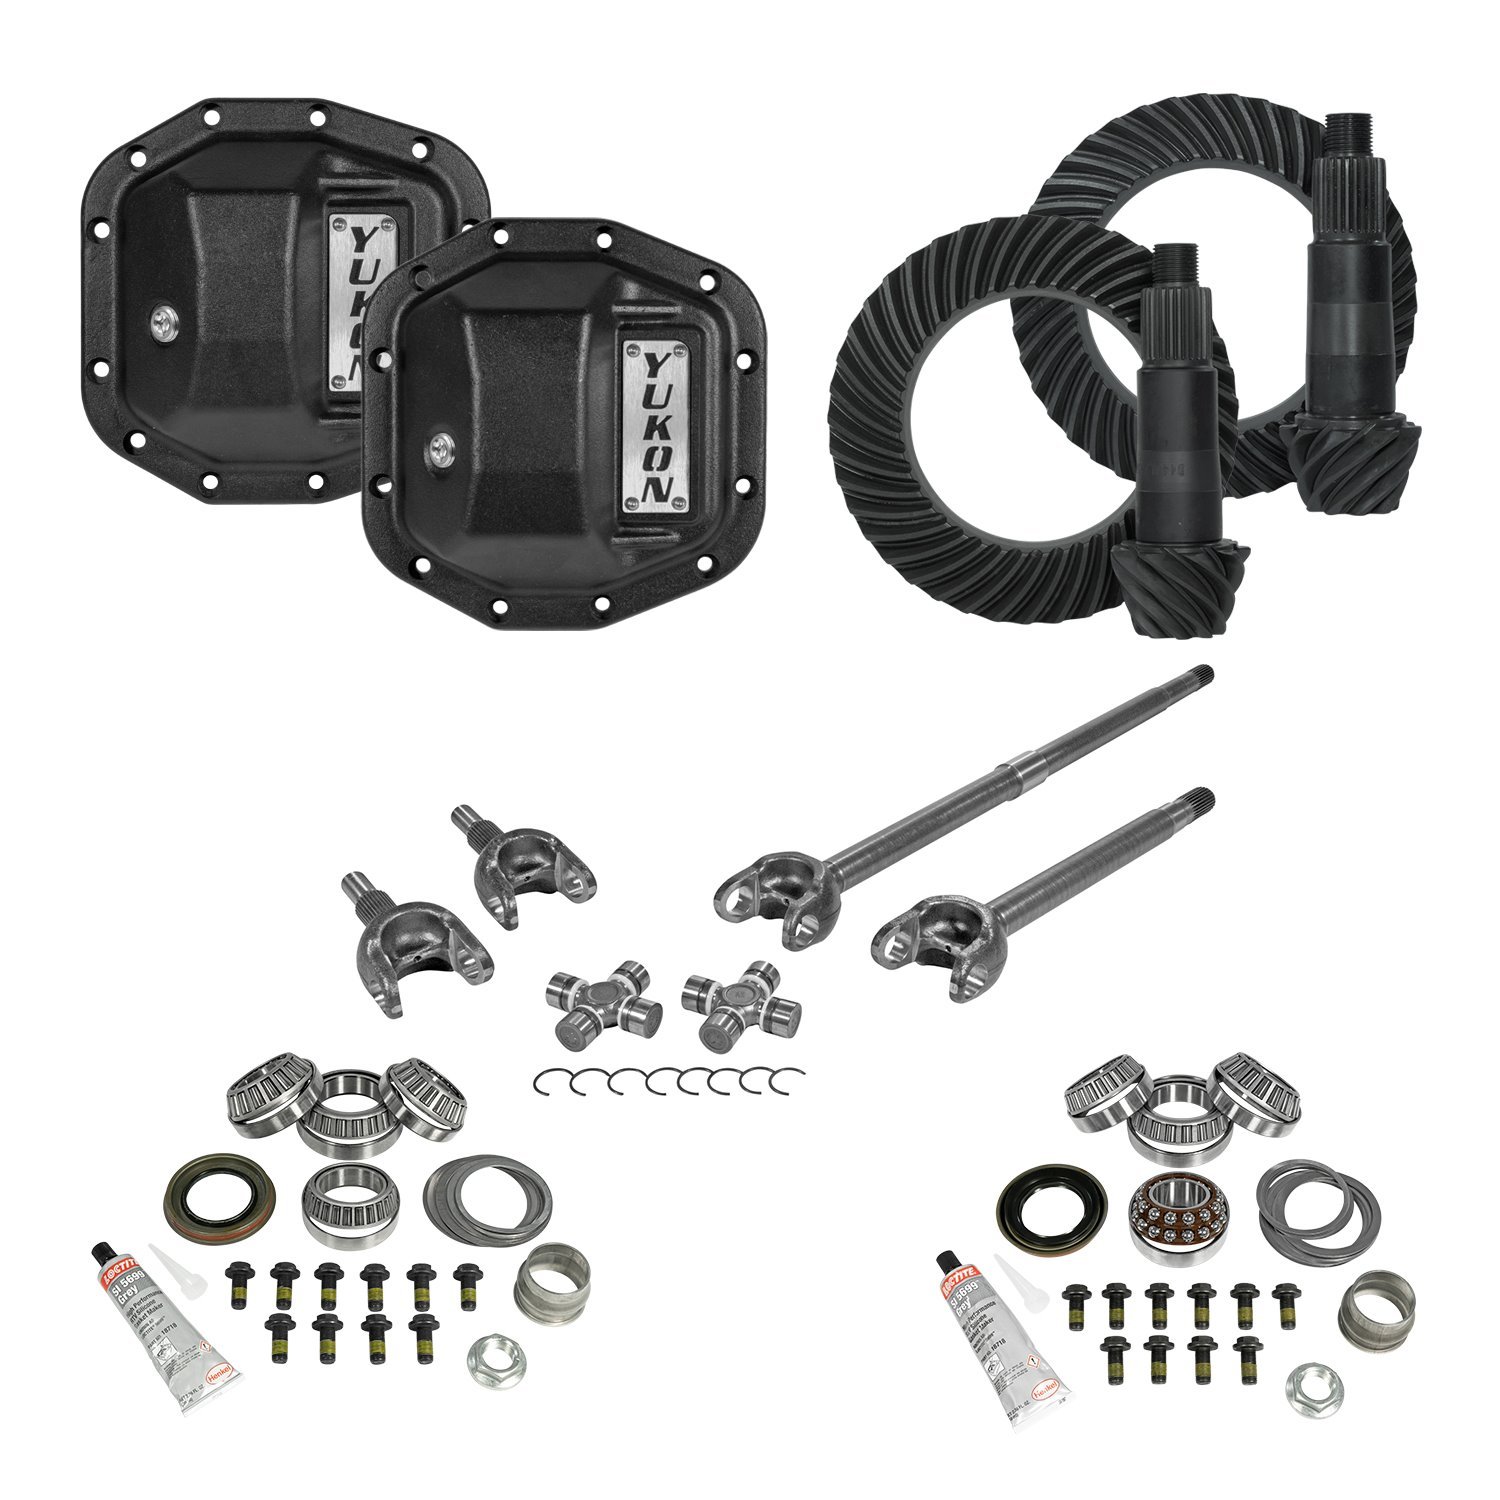 Stage 3 Jeep Jl Re-Gear Kit W/Covers, Front Axles, Dana 30/35, 4.88 Ratio